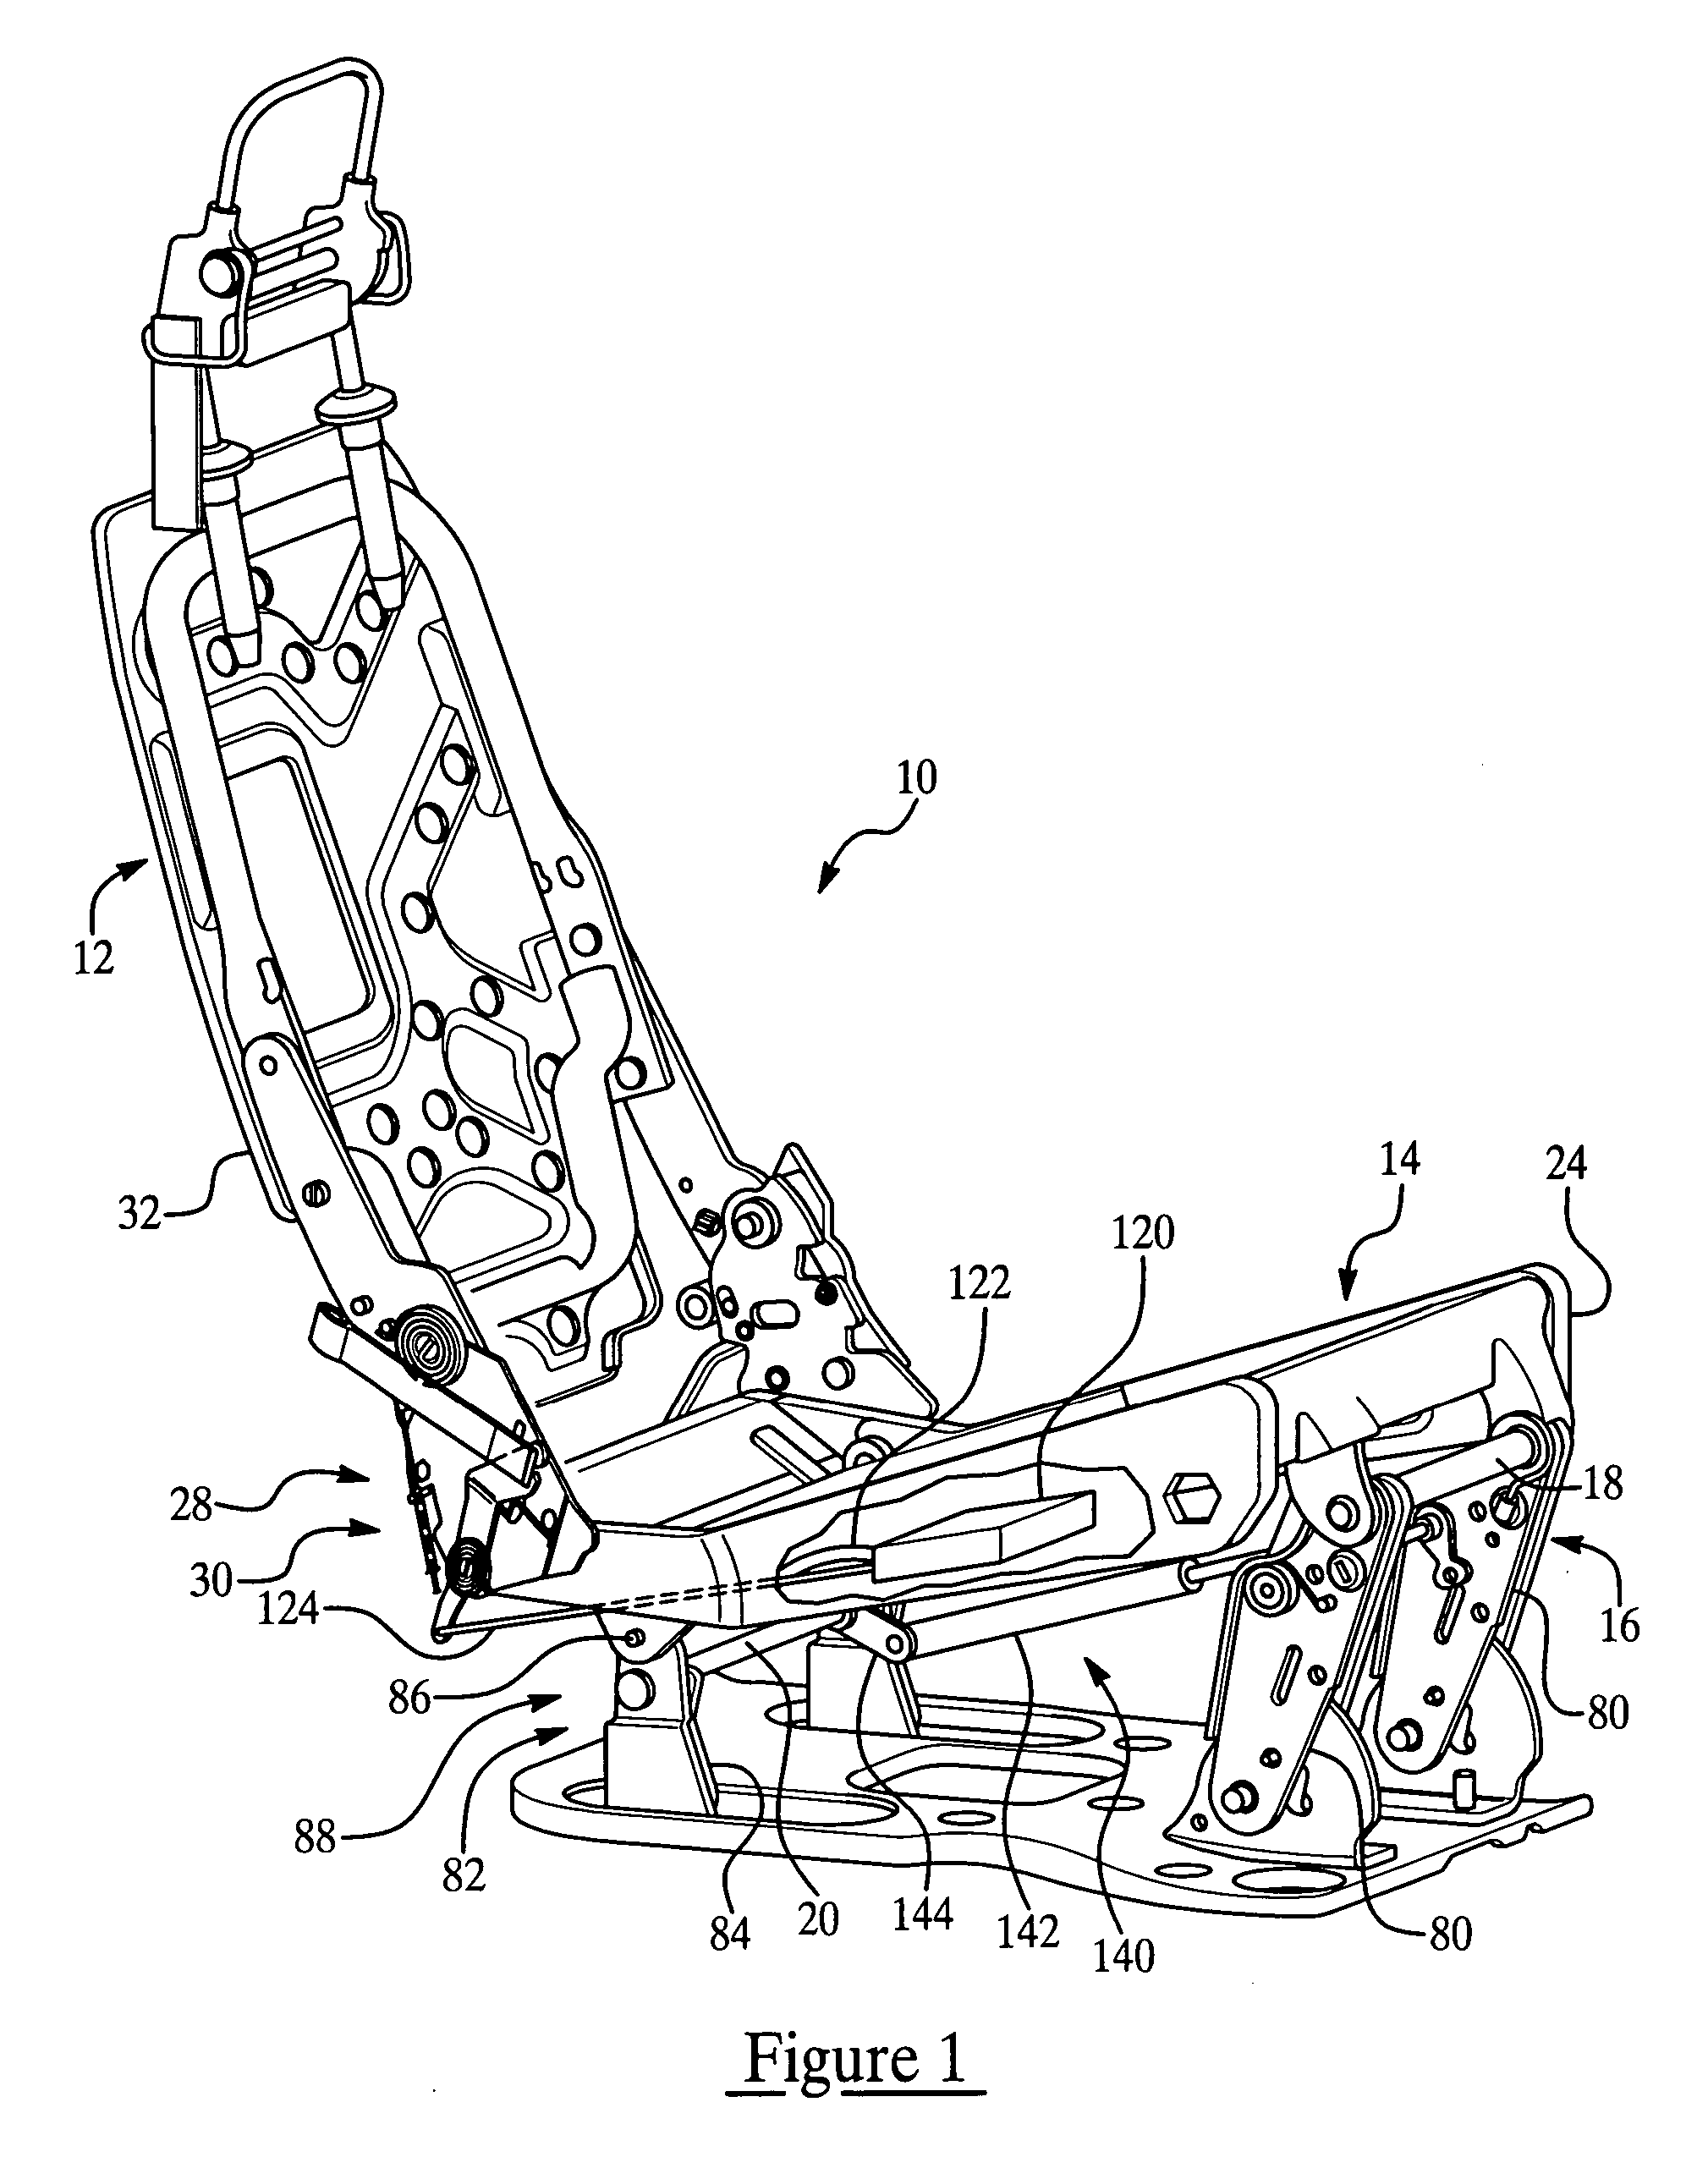 Power assist fold and tumble vehicle seat